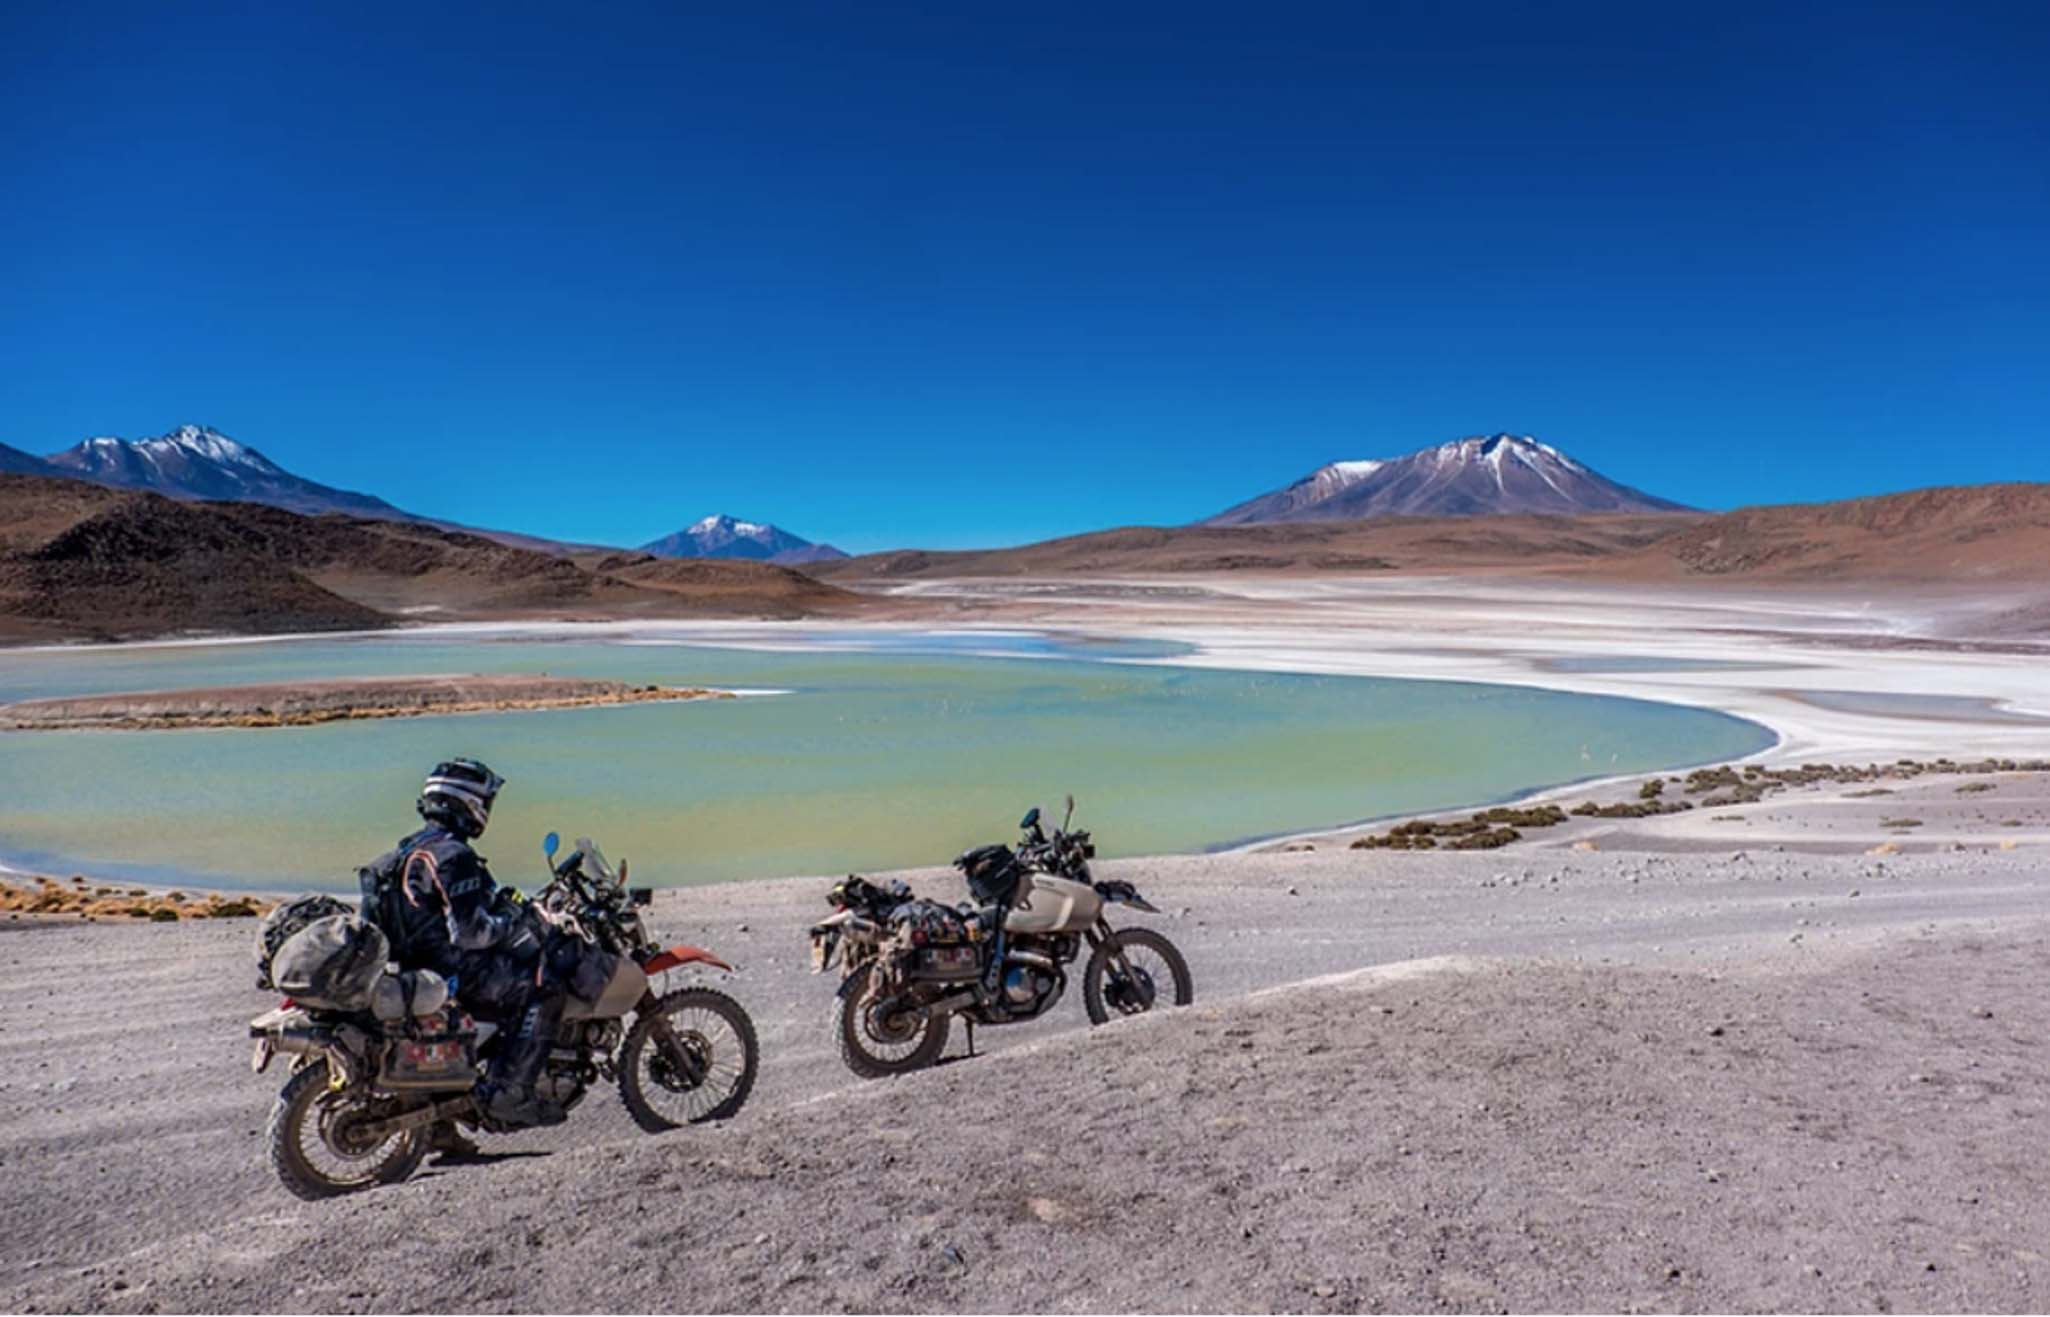 Volcanos on the Lagunas route in Bolivia. At 4000m altitude the air is clear.